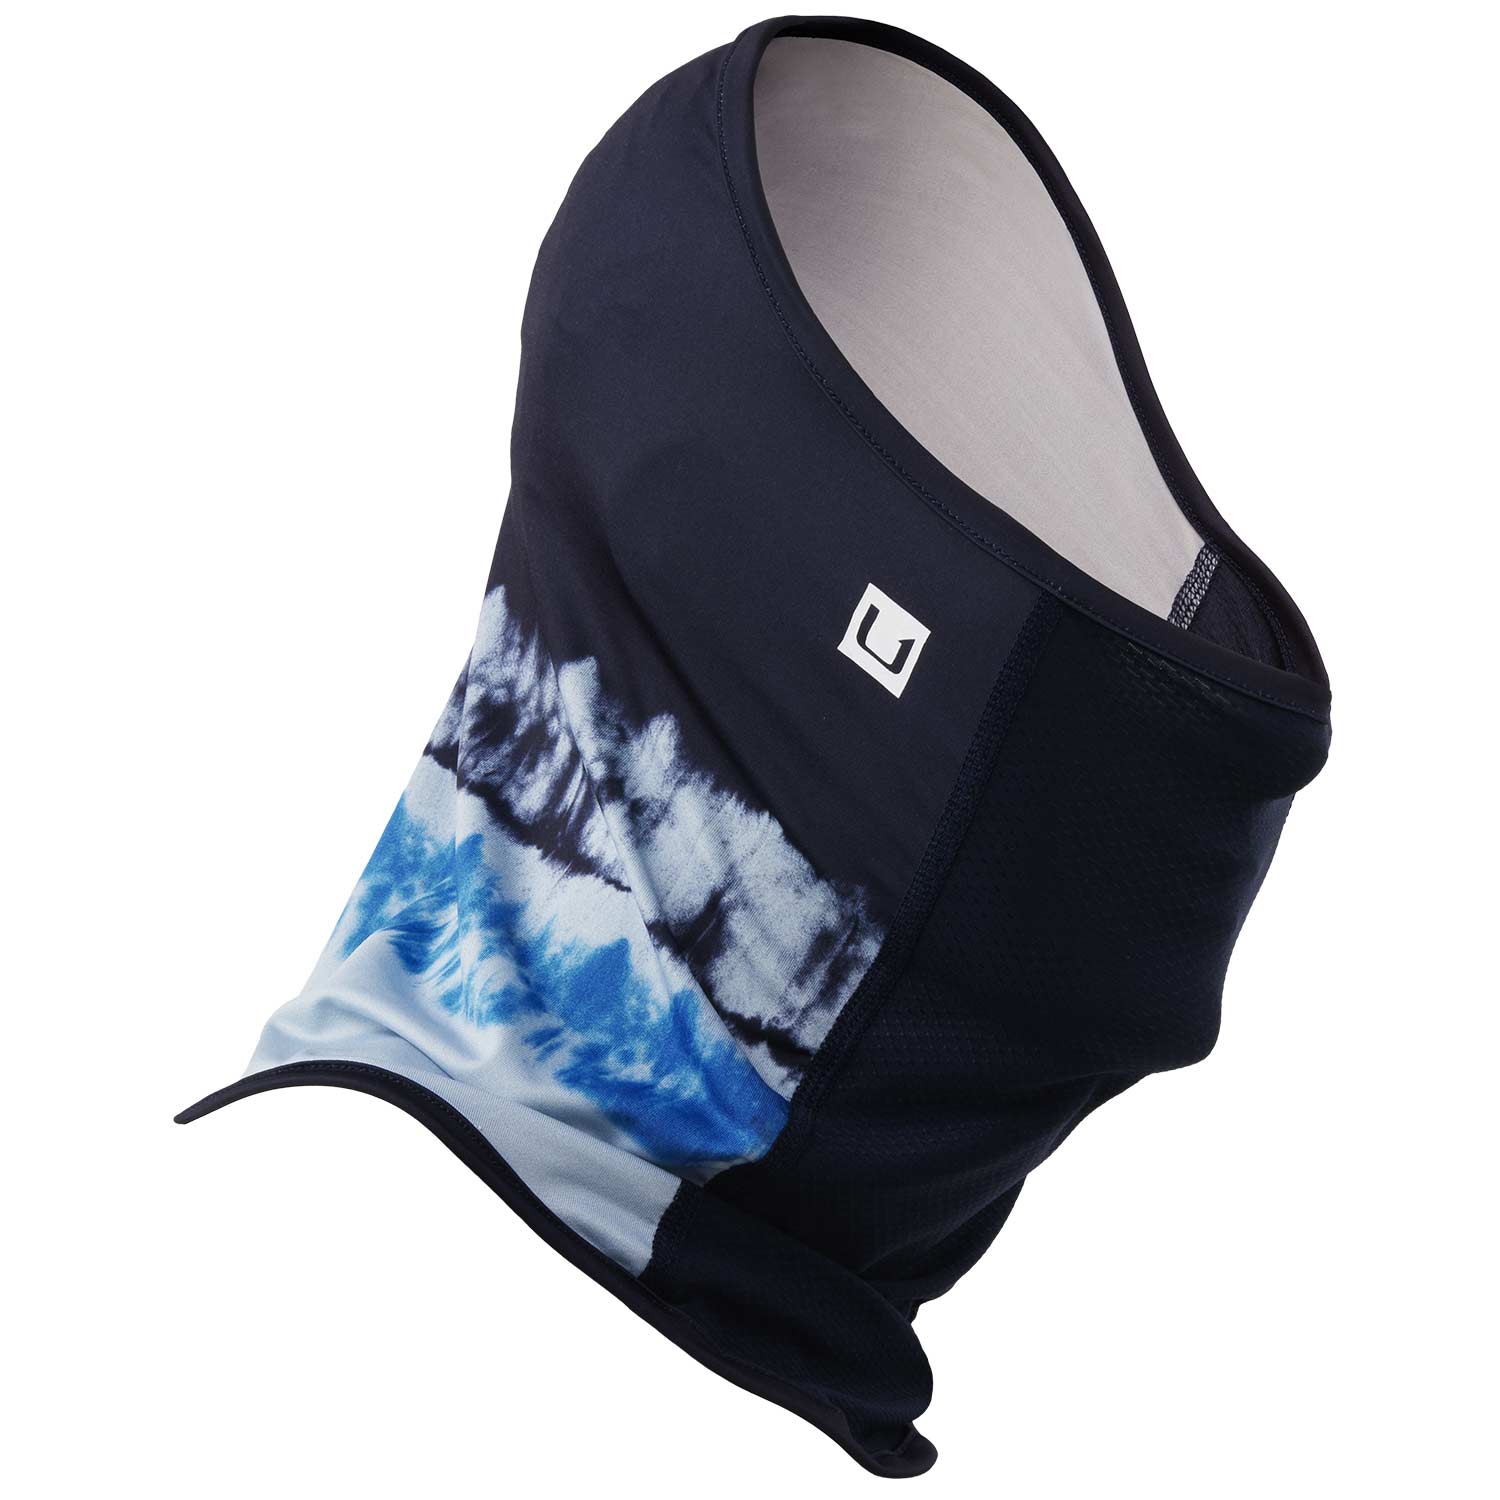  Huk Men's Neck Gaiter  Face UPF 30+ Sun Protection, Glacier,  OSFA : Clothing, Shoes & Jewelry